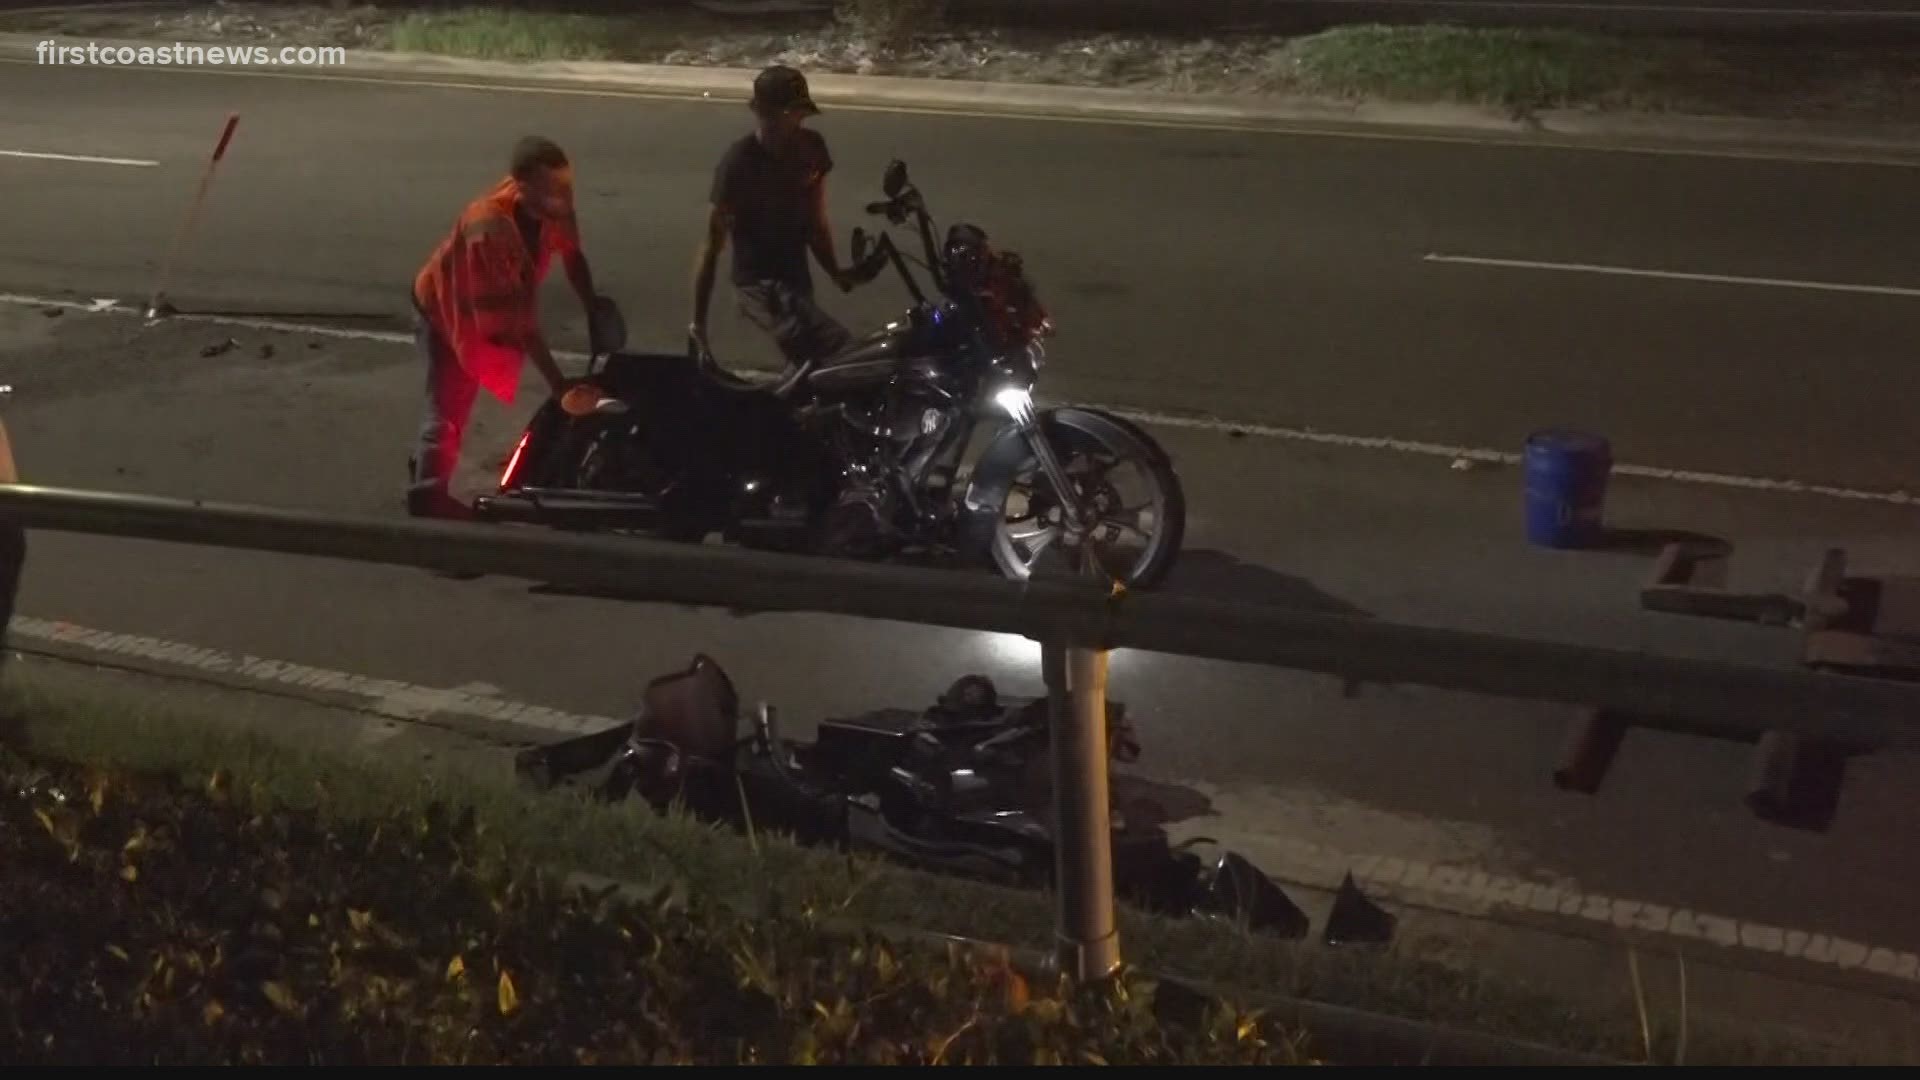 FDOT offers safety tips after 5 people killed in motorcycle crashes in NE Florida over the past month